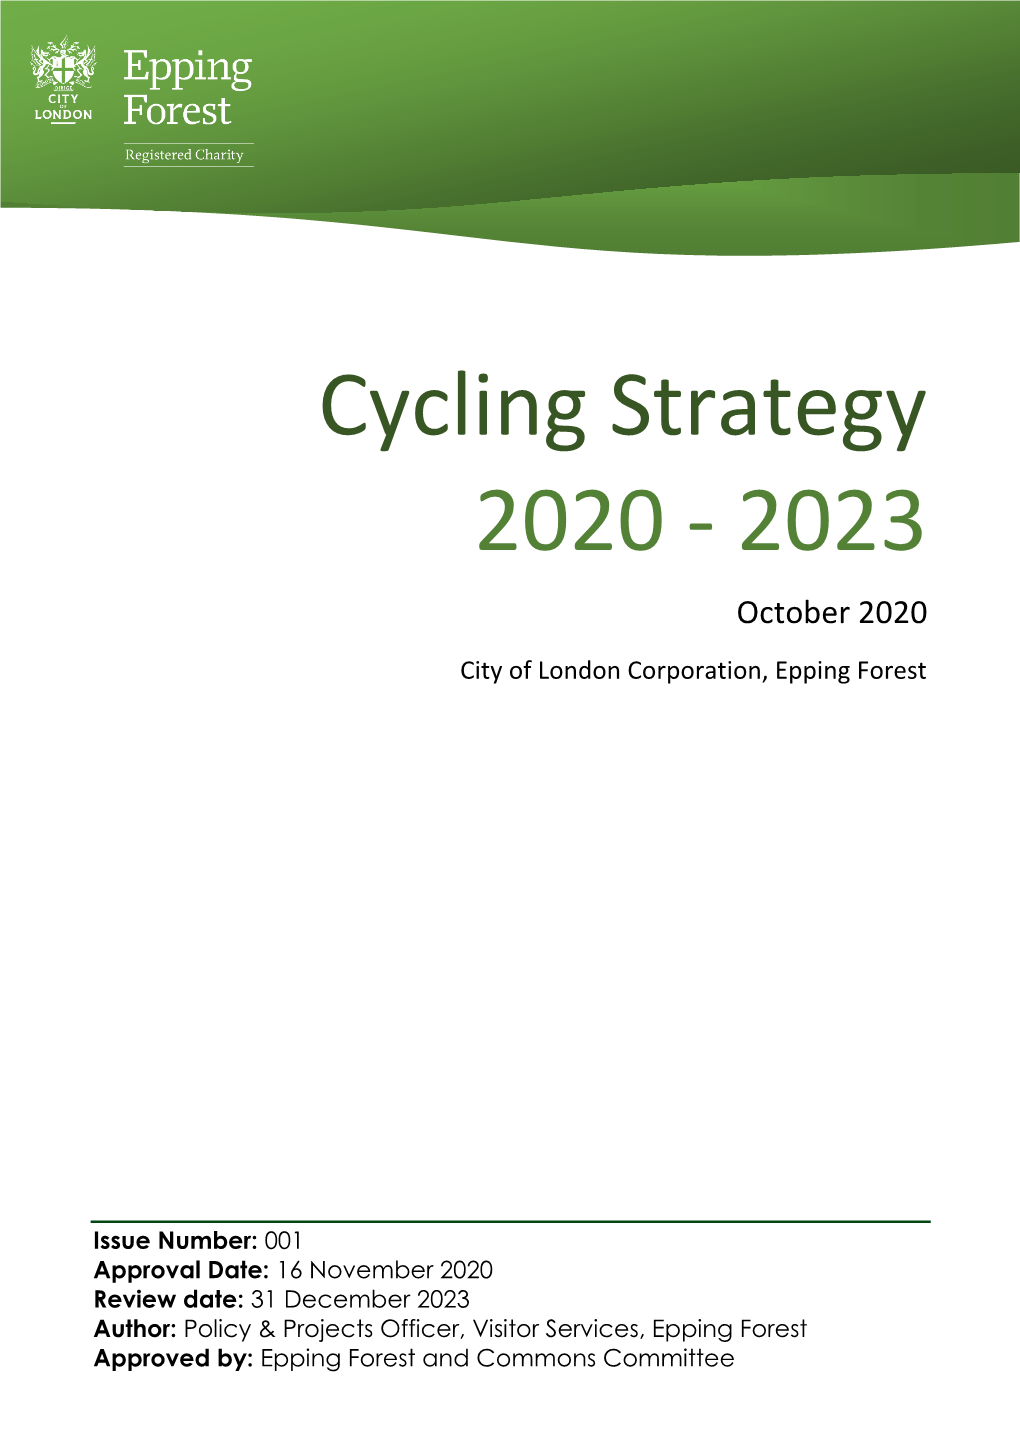 Cycling Strategy 2020 - 2023 October 2020 City of London Corporation, Epping Forest